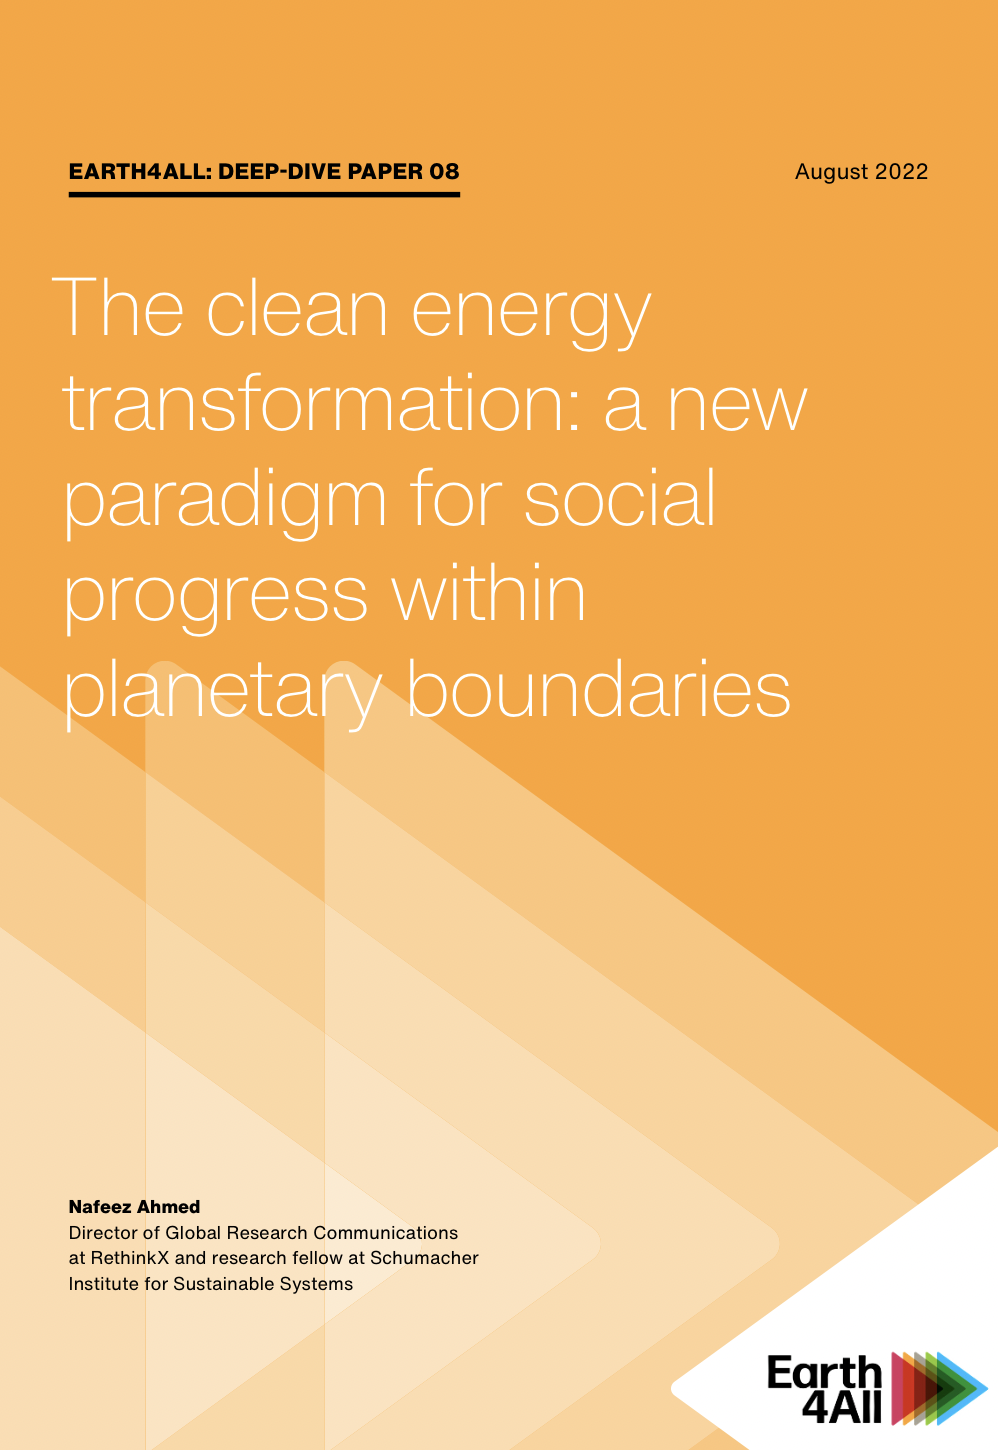 The clean energy transformation: a new paradigm for social progress within planetary boundaries